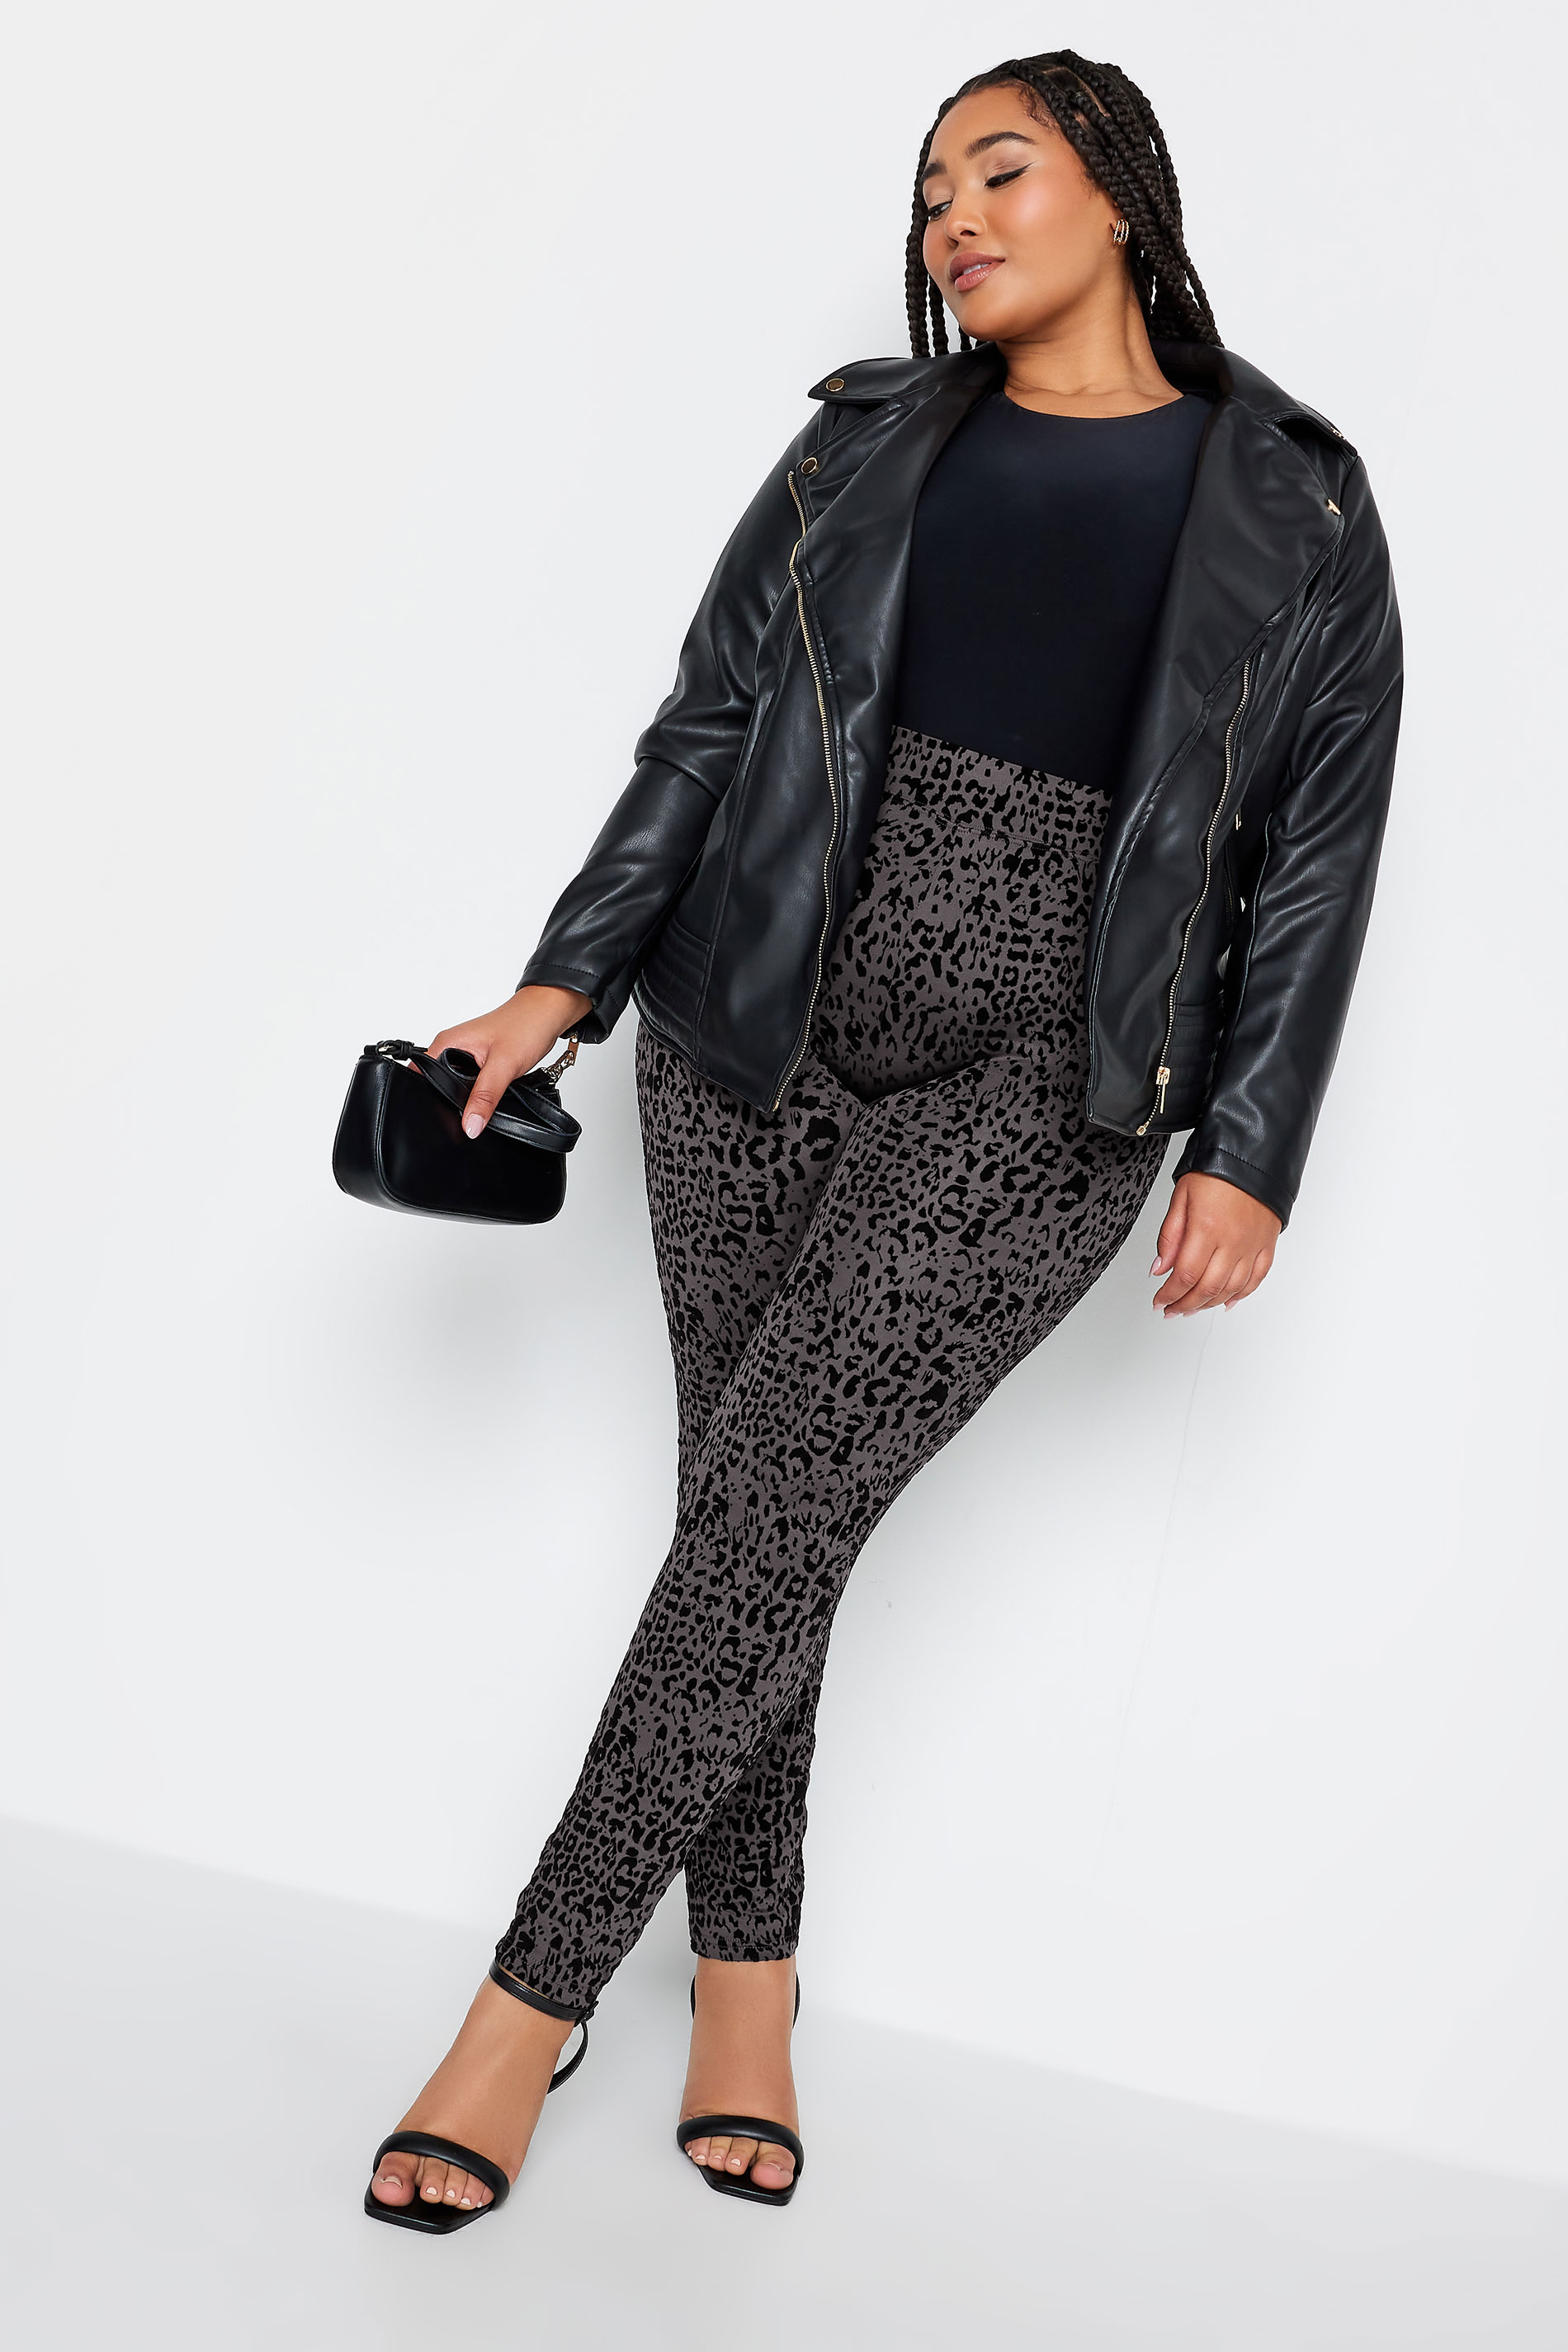 Buttery Smooth Snow Leopard Extra Plus Size Leggings - 3X-5X